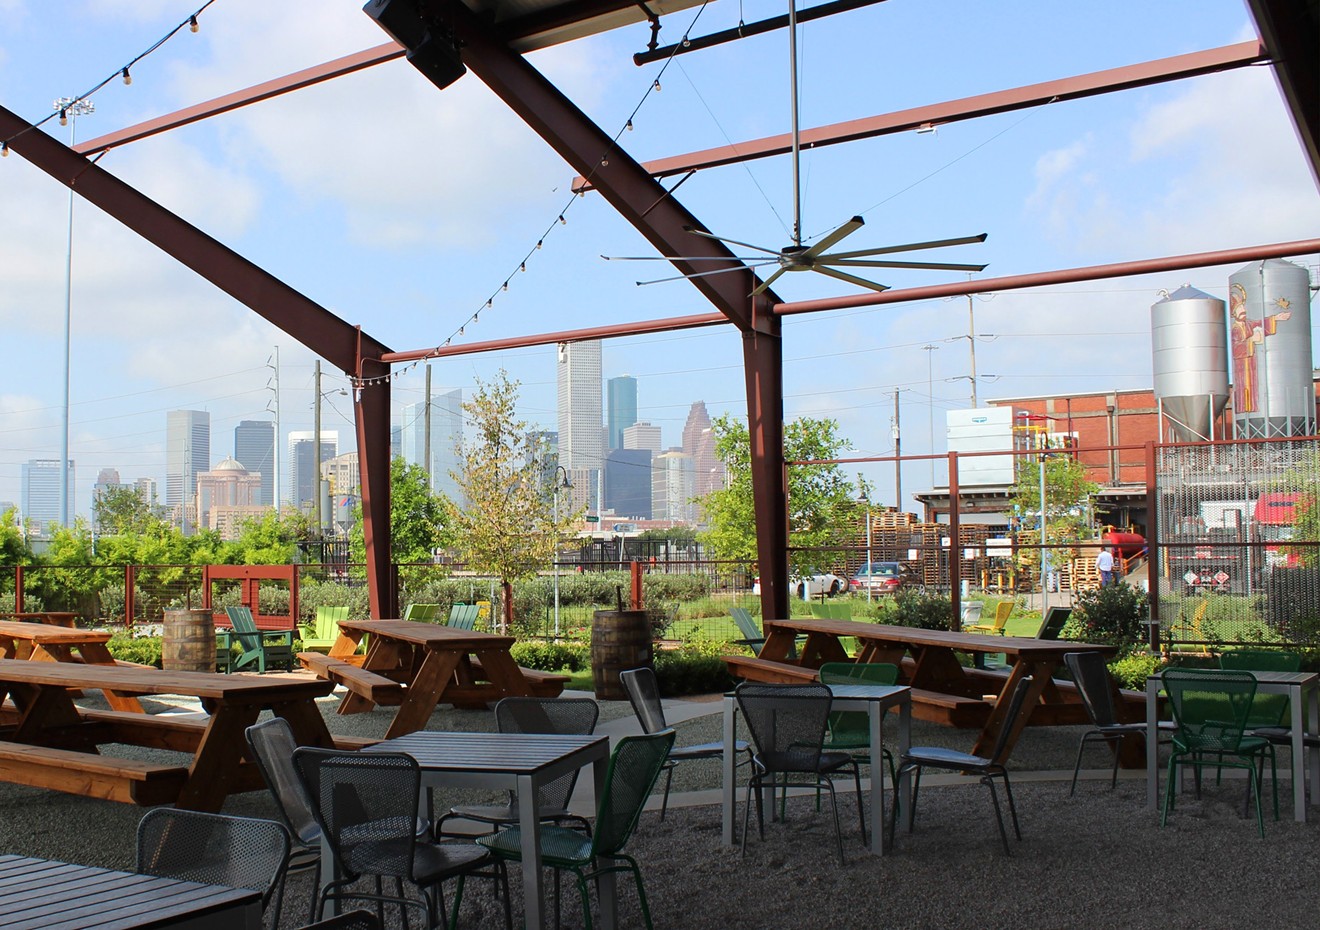 Sip local suds under the skyline at Saint Arnold Brewing Company.